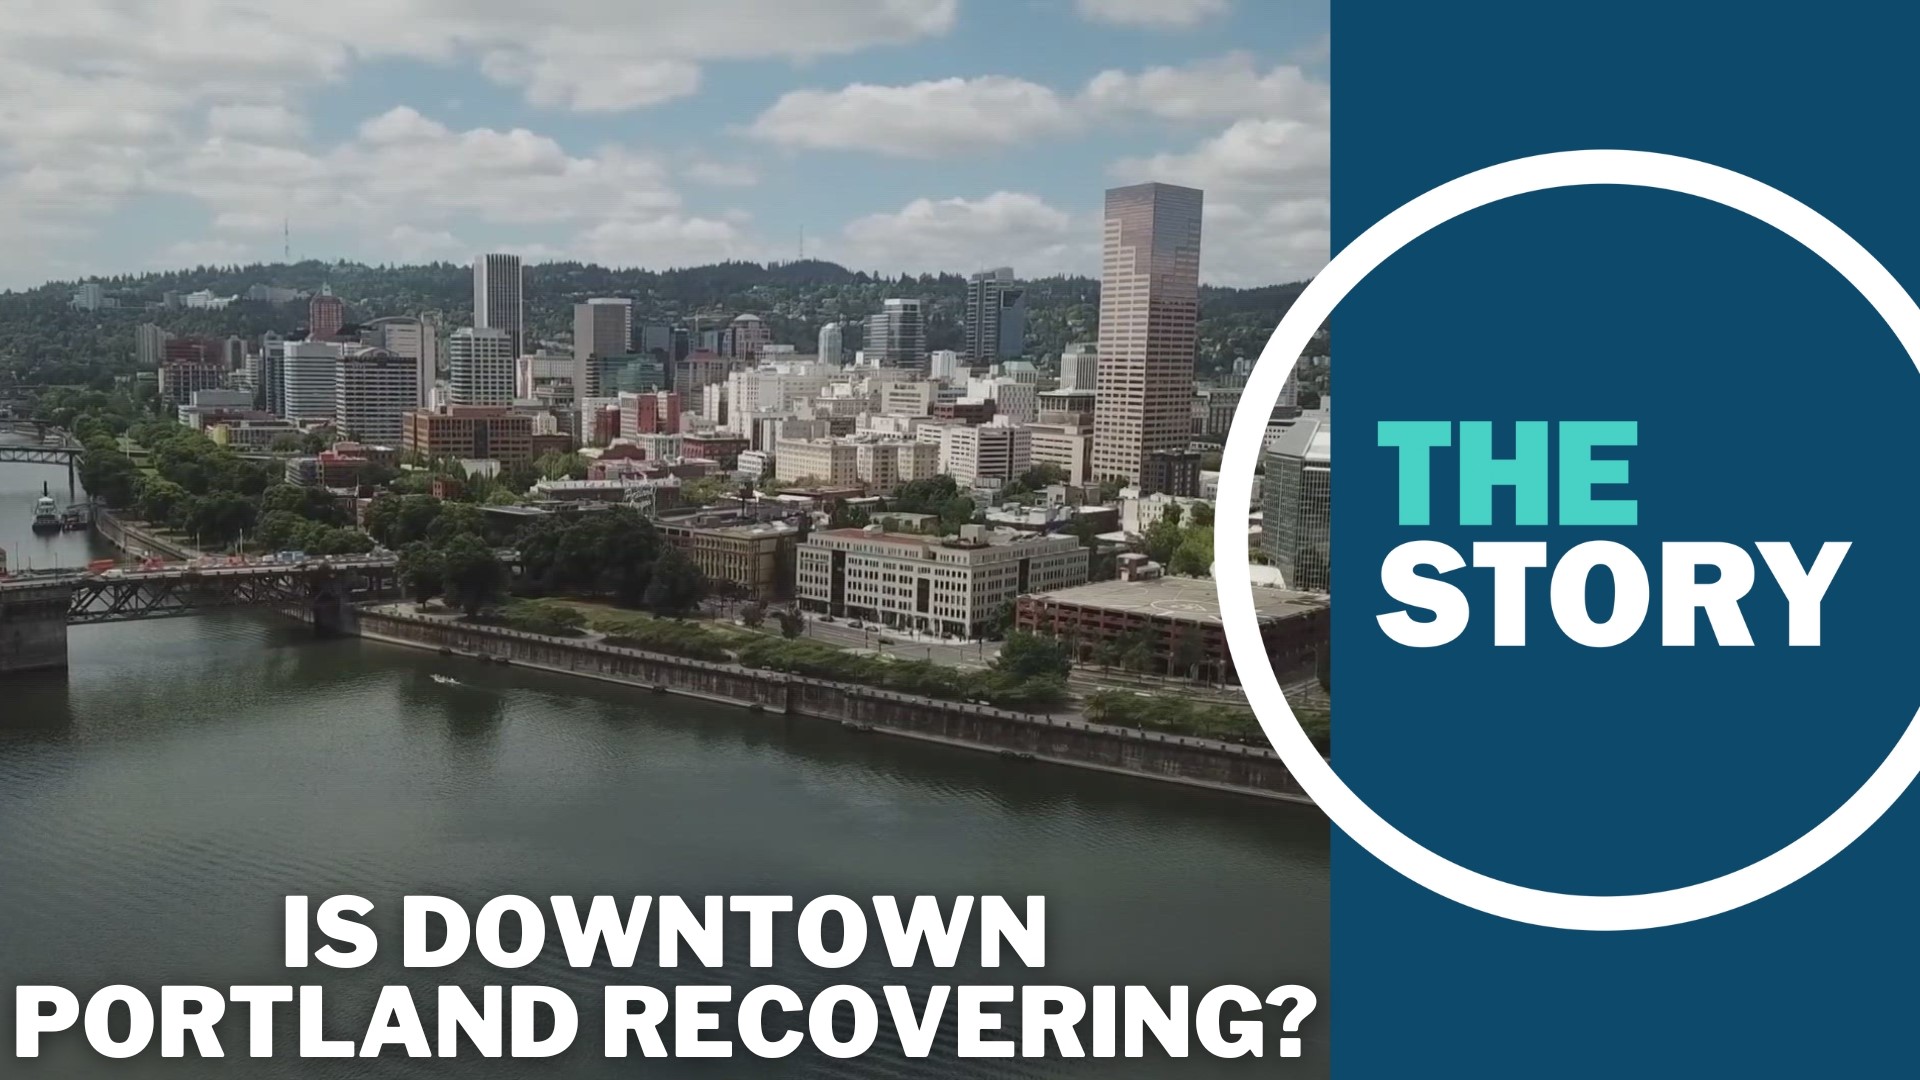 A study that looked at recovery in 62 downtown areas in the U.S. and Canada placed Portland at second to last, above San Francisco. But it's not the whole story.